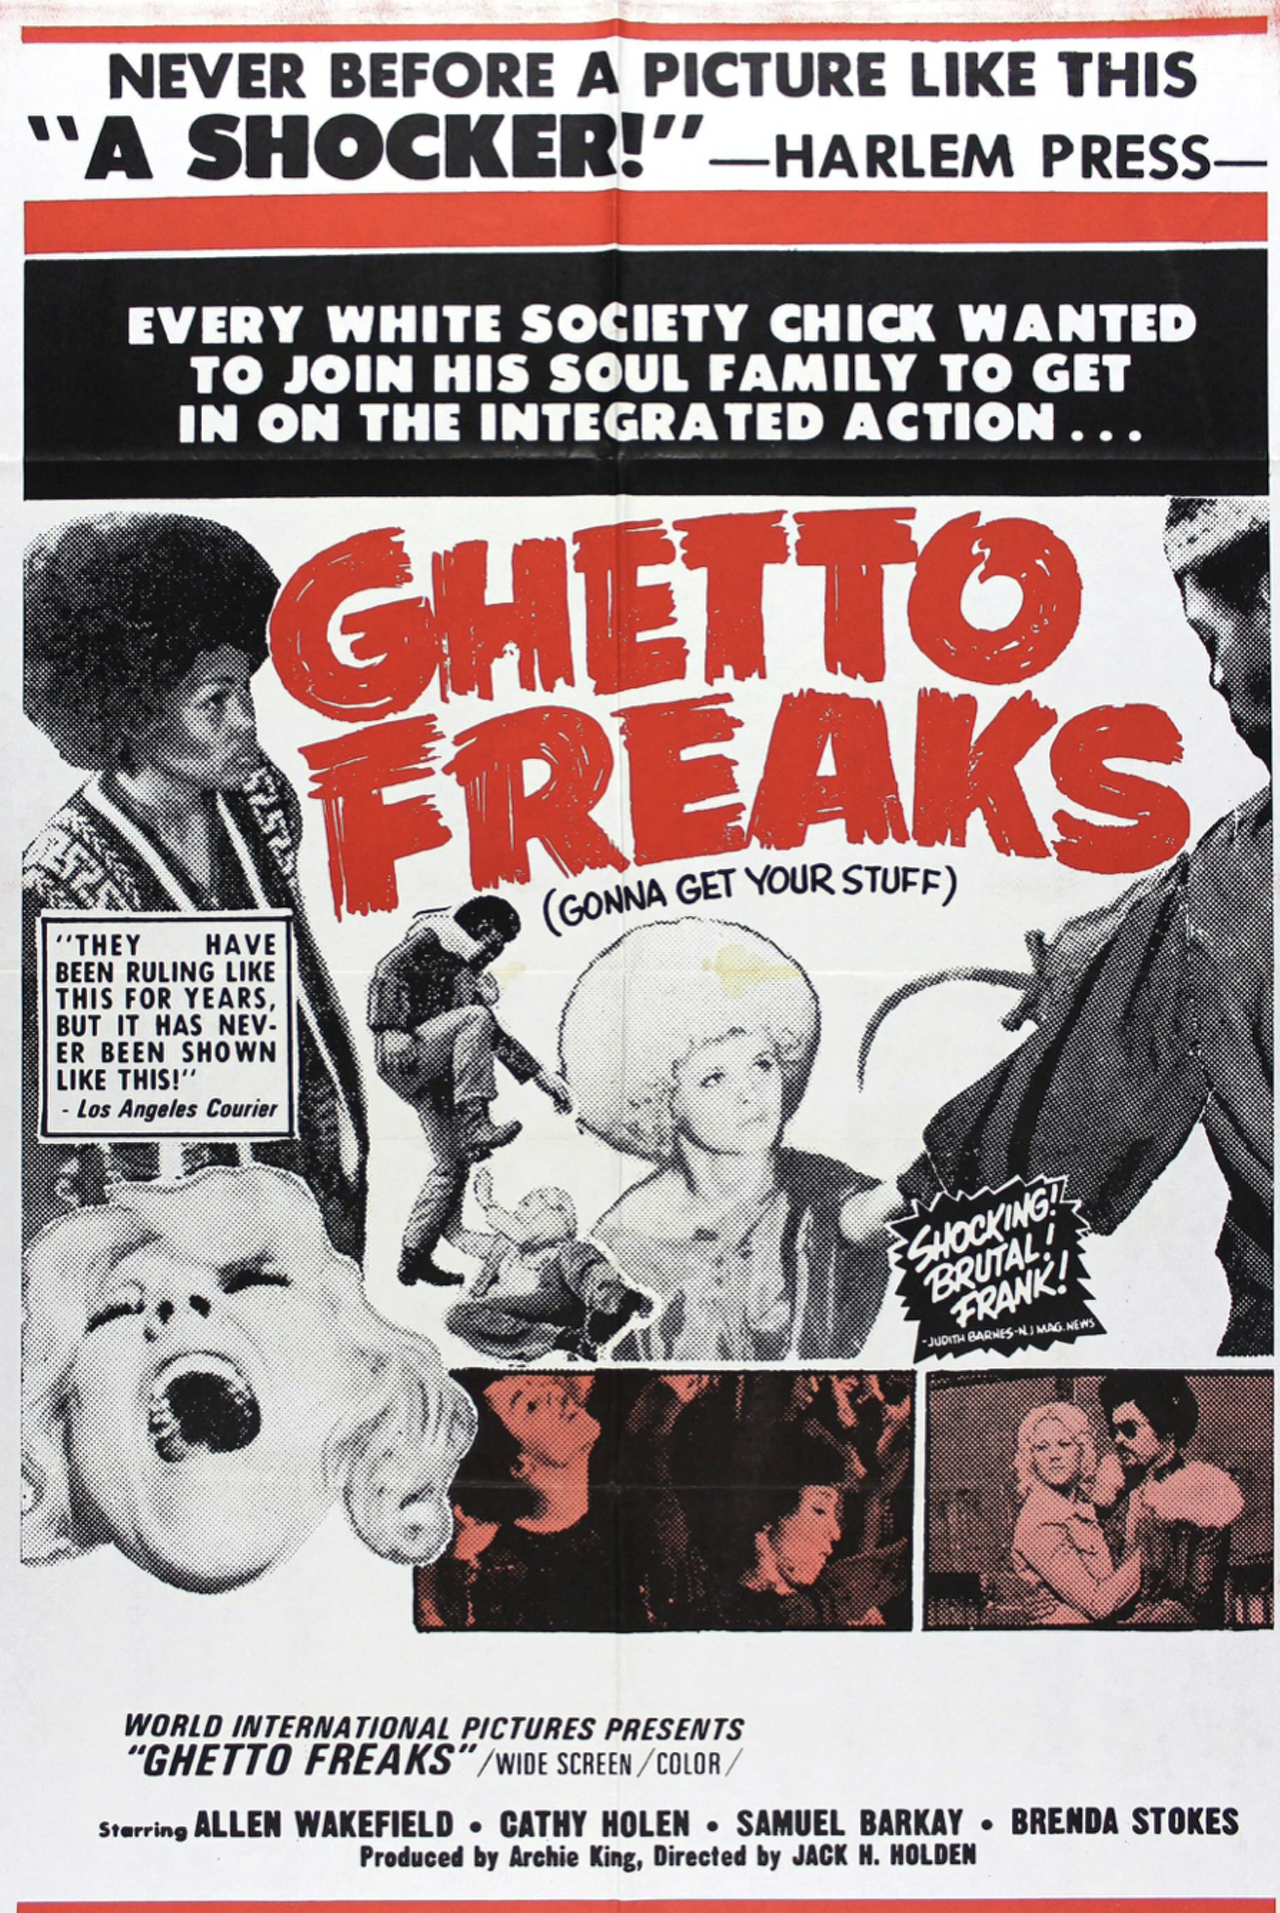   Ghetto Freaks (Sign of Aquarius) (1970) 
Yes, there was a film from 1970 called  Ghetto Freaks, and it was shot in Cleveland. It’s about a group of hippies who live in a communal apartment and are arrested during a protest. Definitely looks like a shocker.